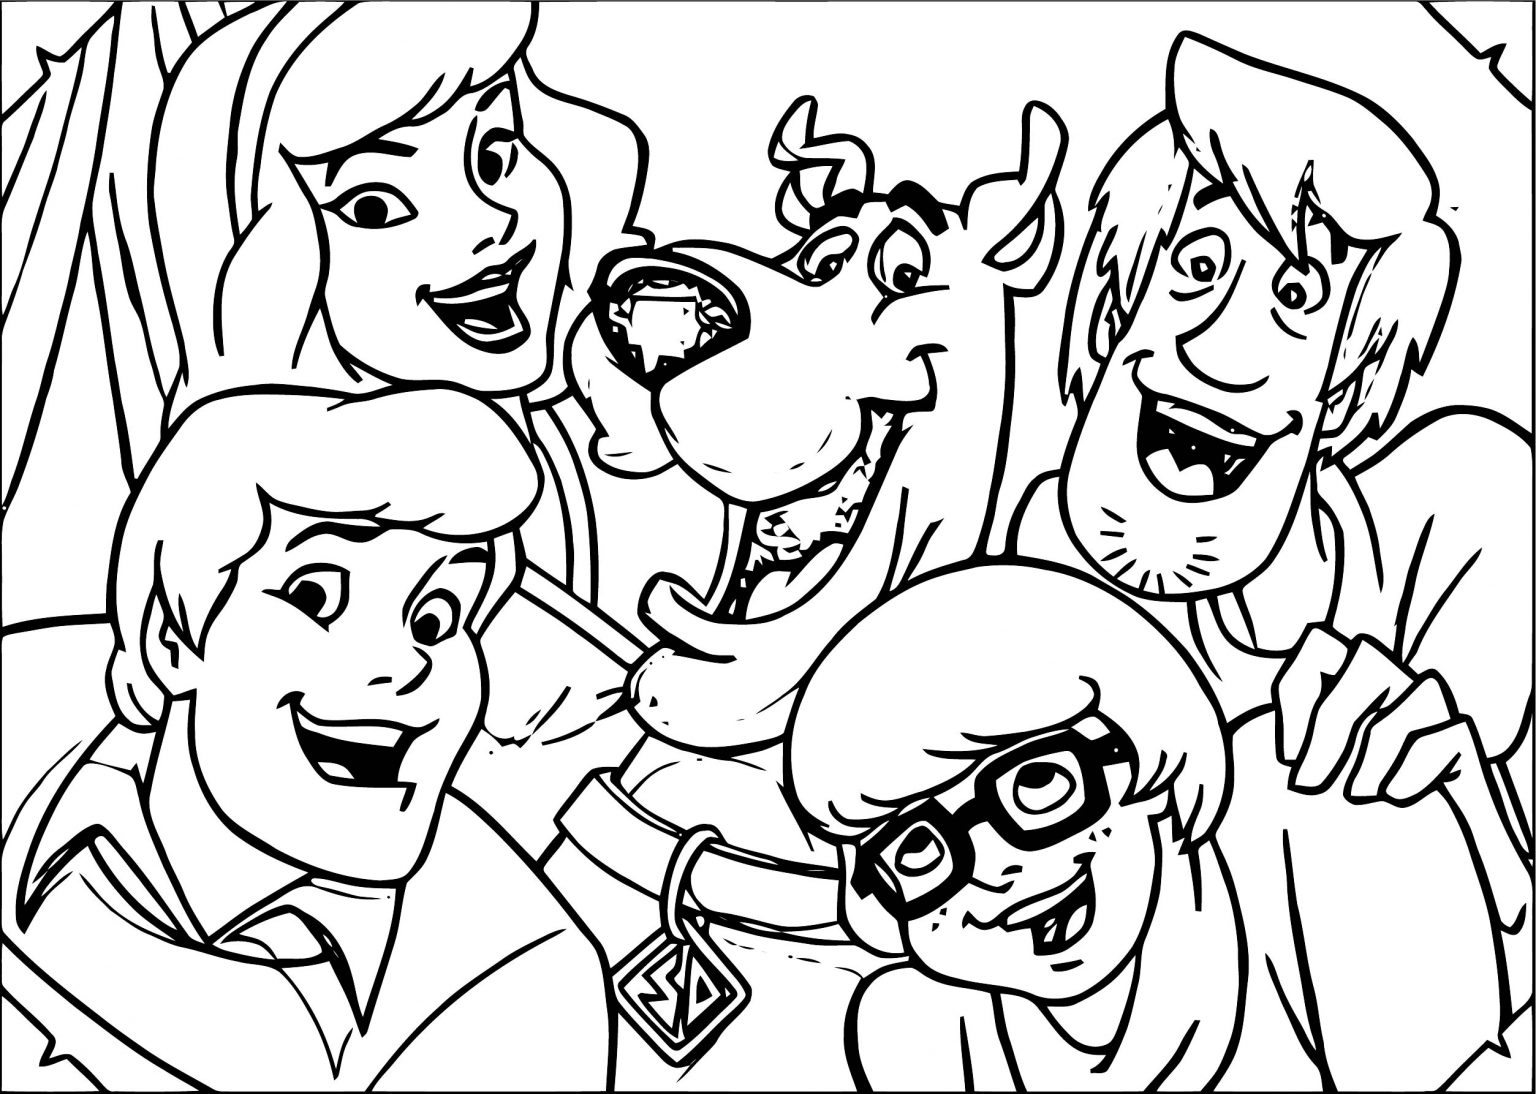 Ant Cute Coloring Page - Wecoloringpage.com